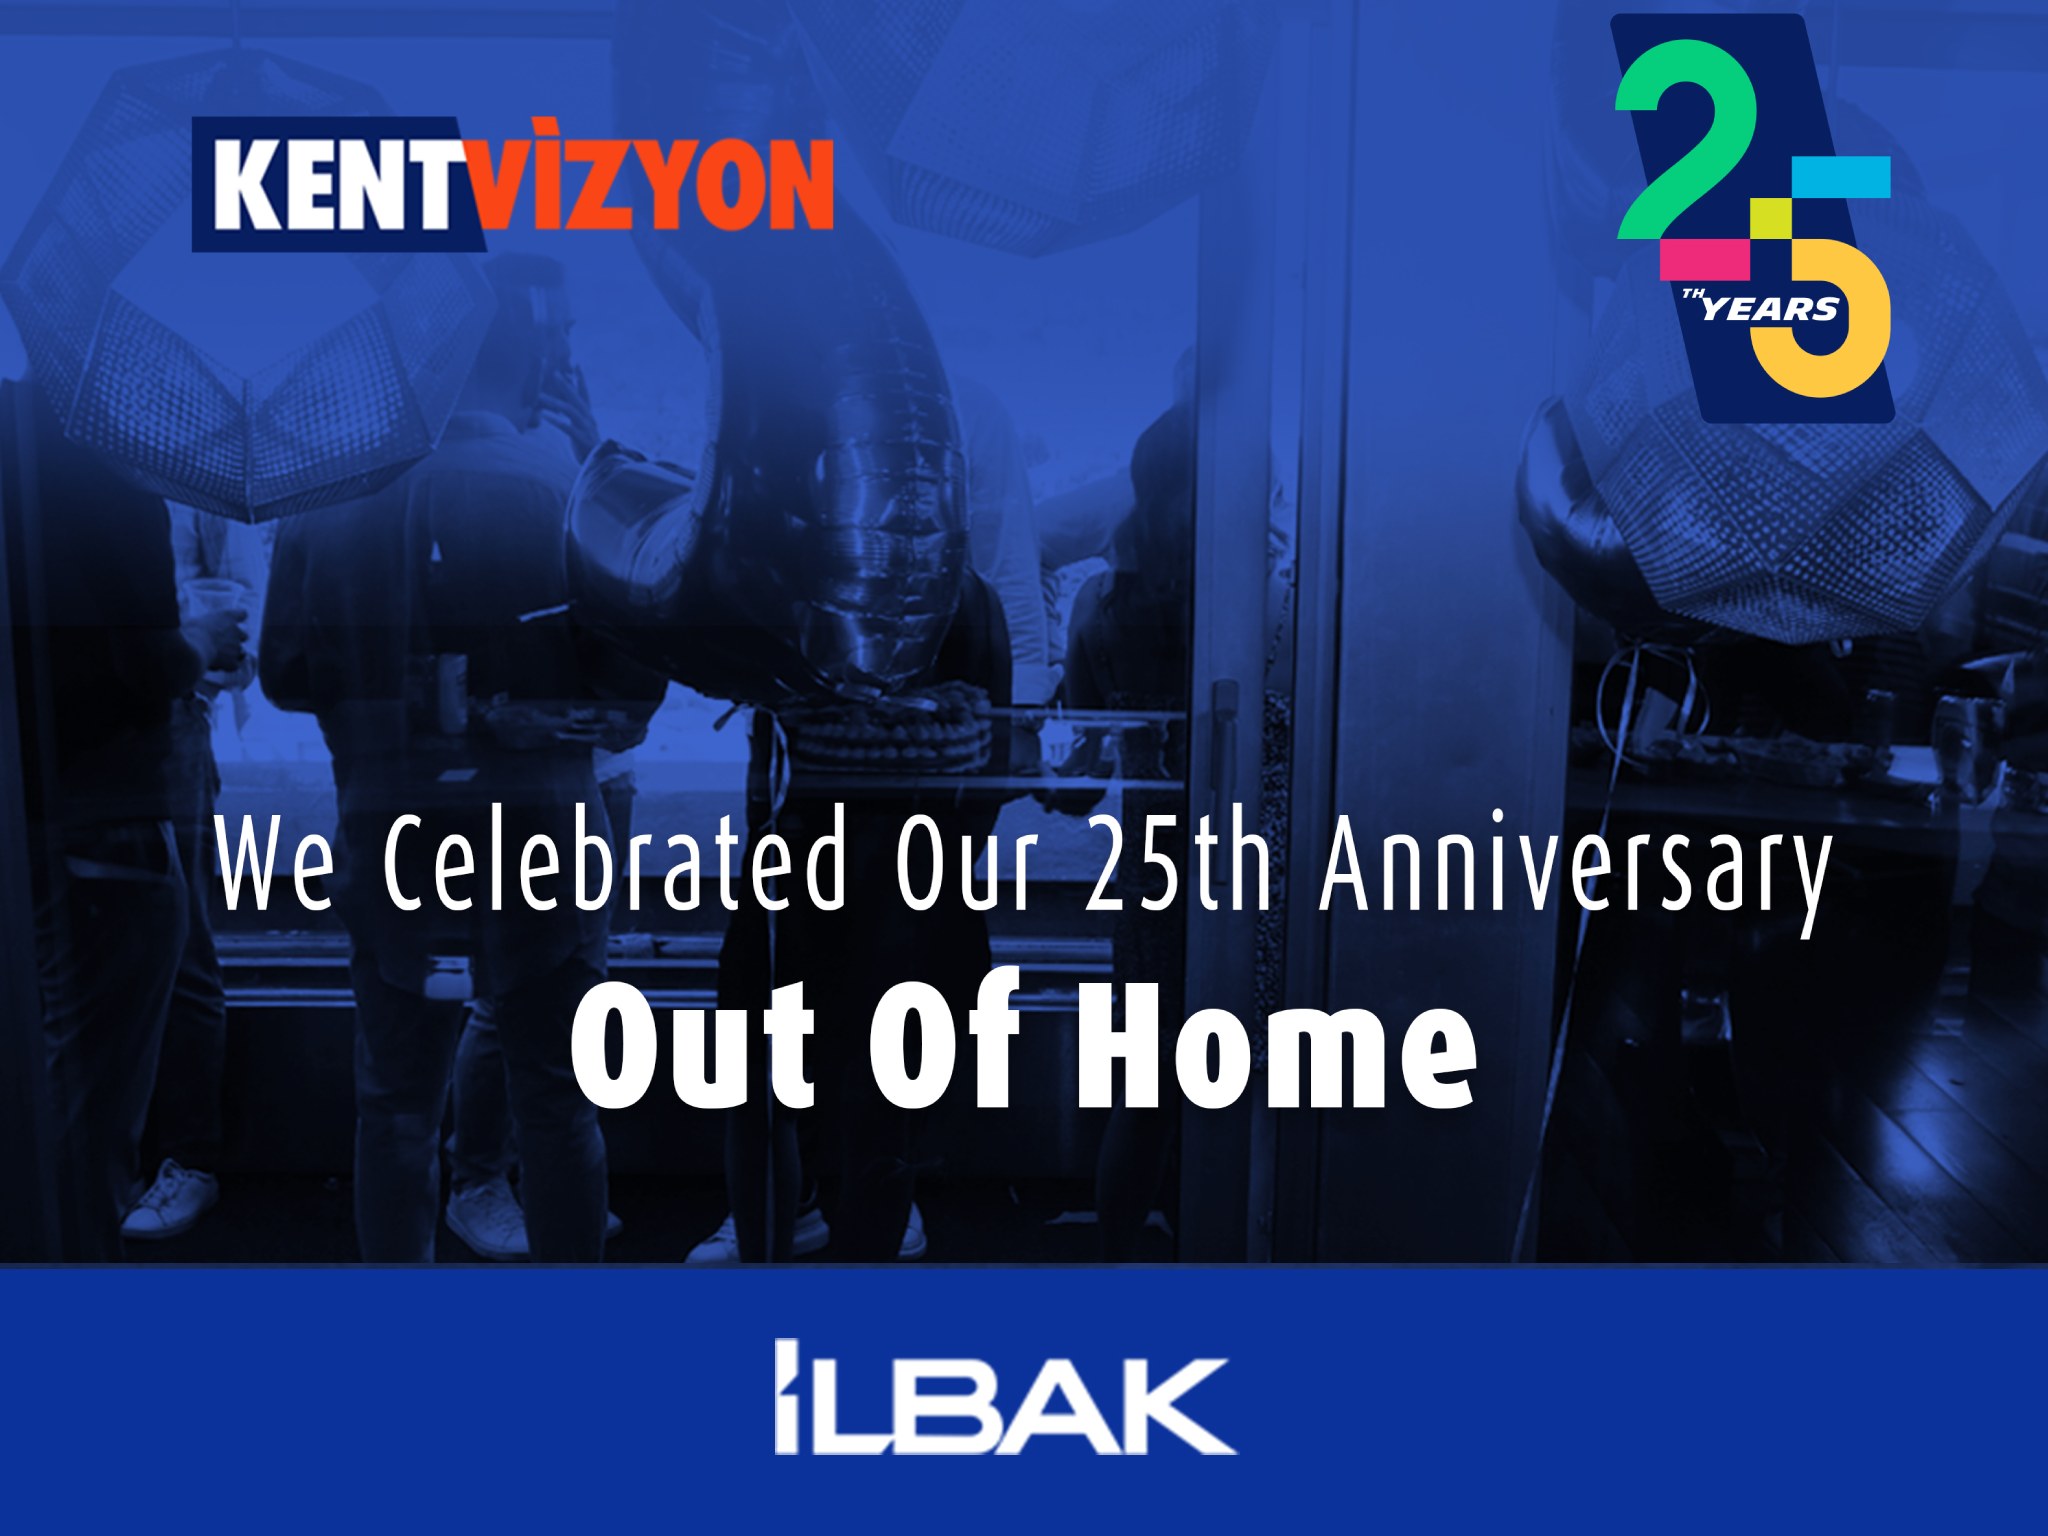 Our 25th Anniversary in Out of Home Advertising Industry